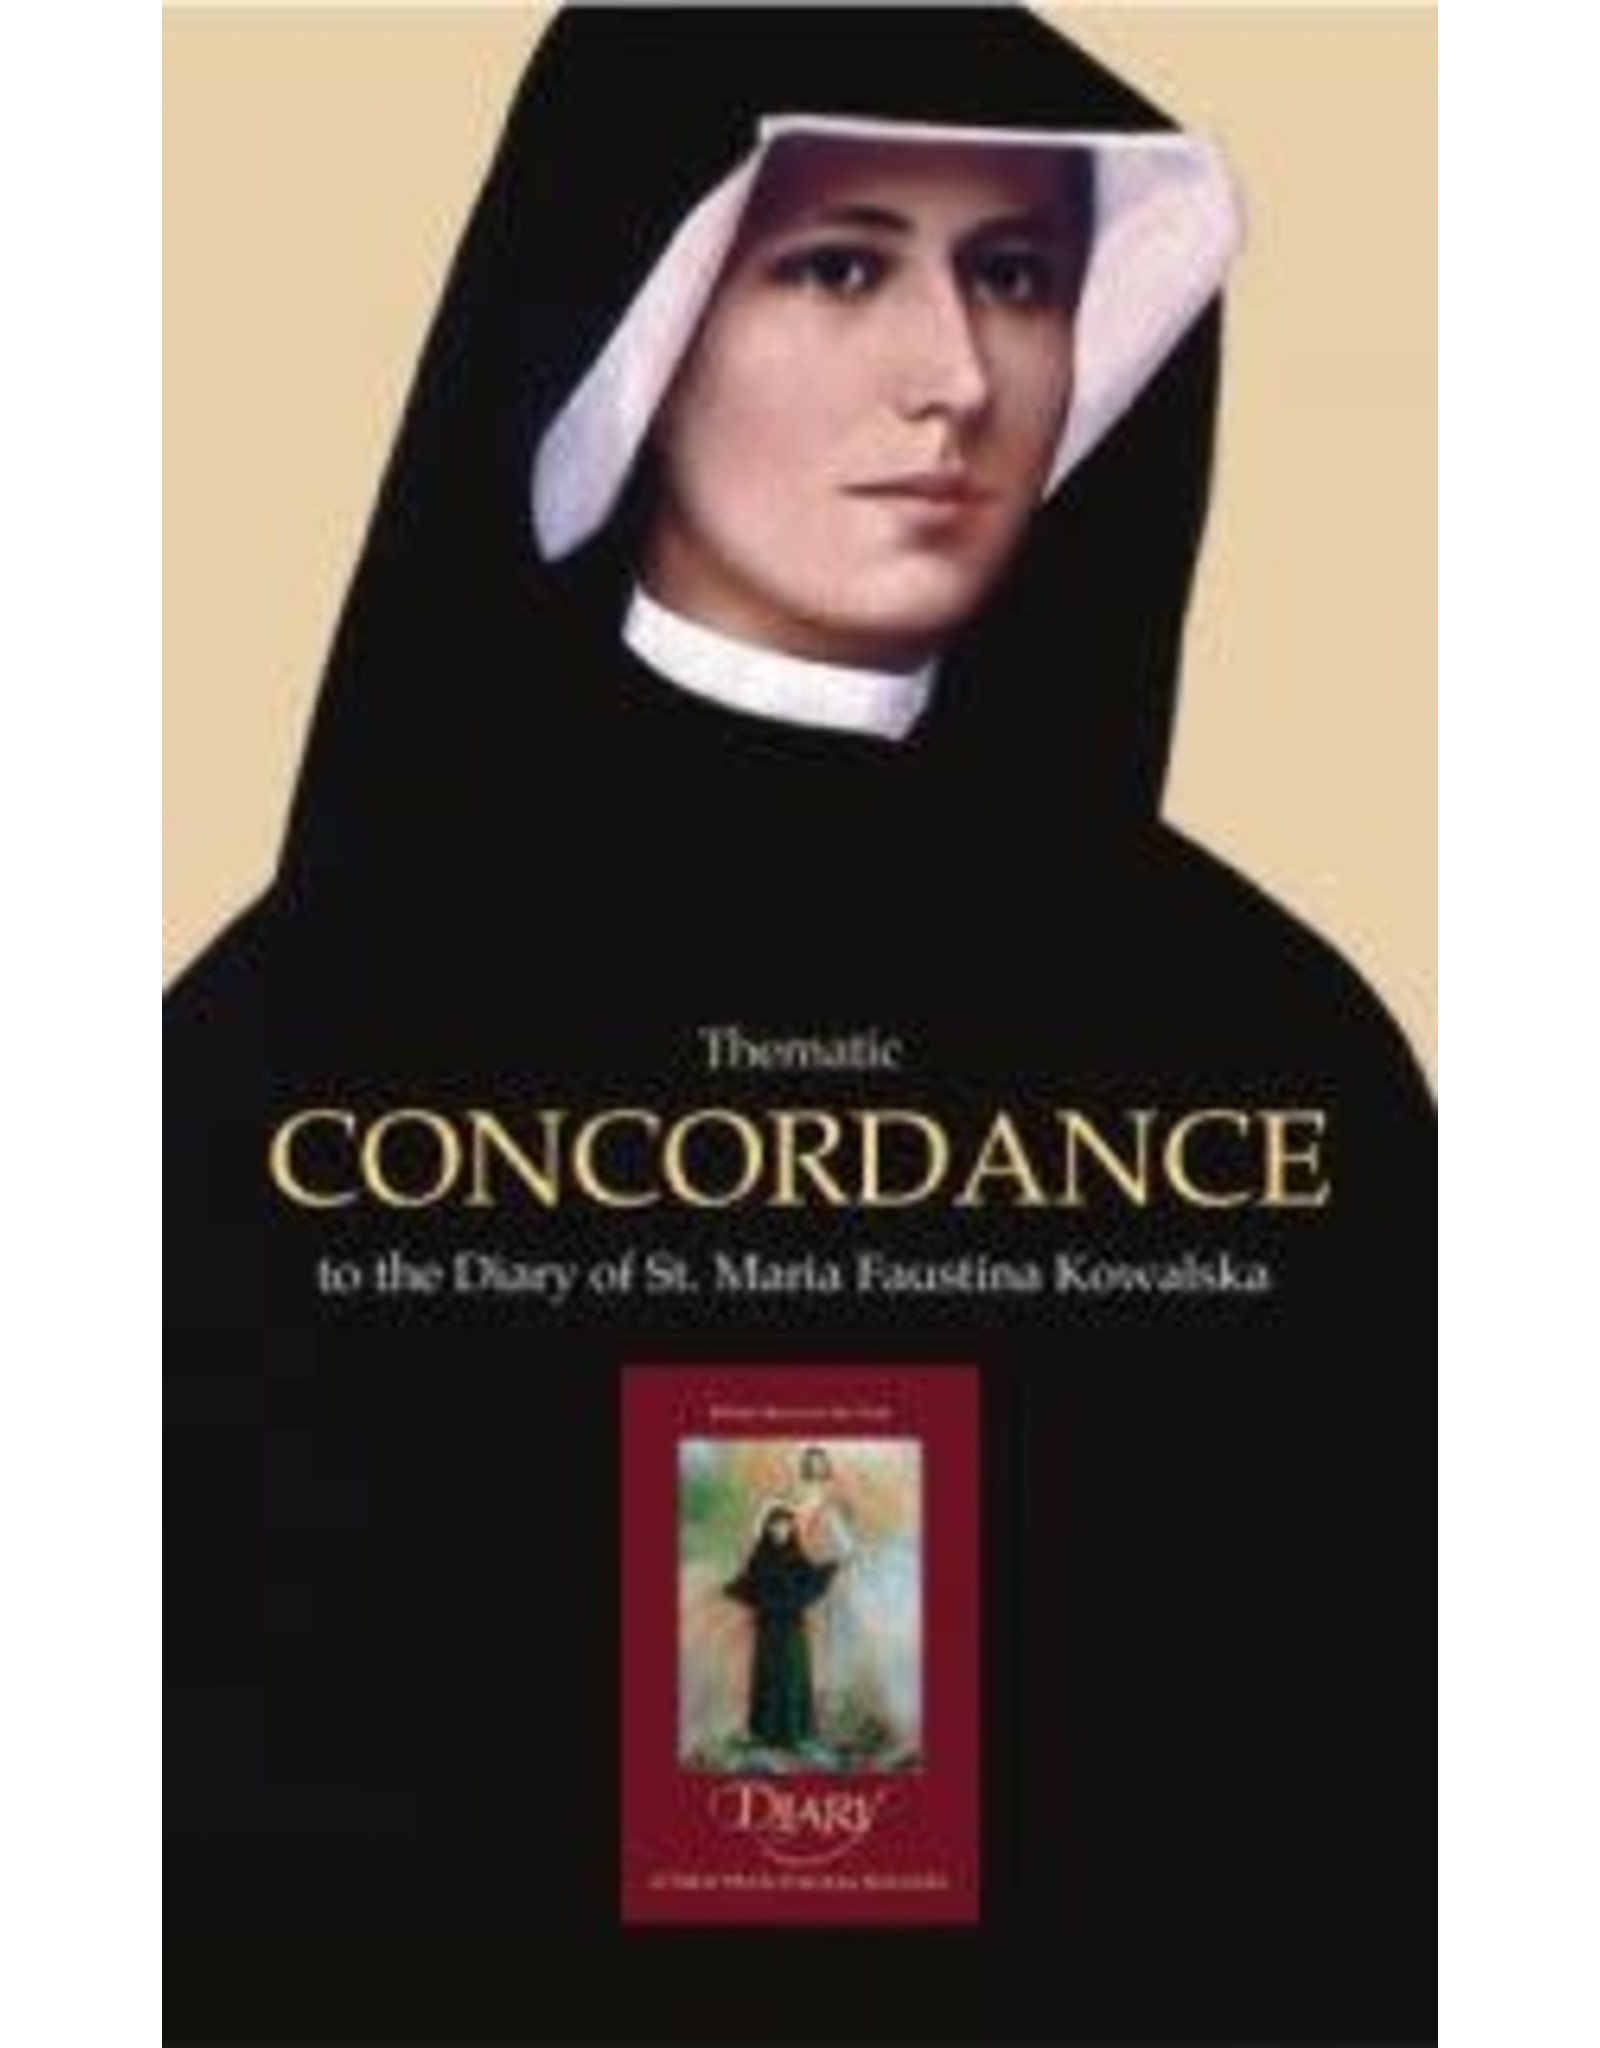 Association of Marian Helpers Thematic Concordance to the Diary of St. Maria Faustina Kowalska